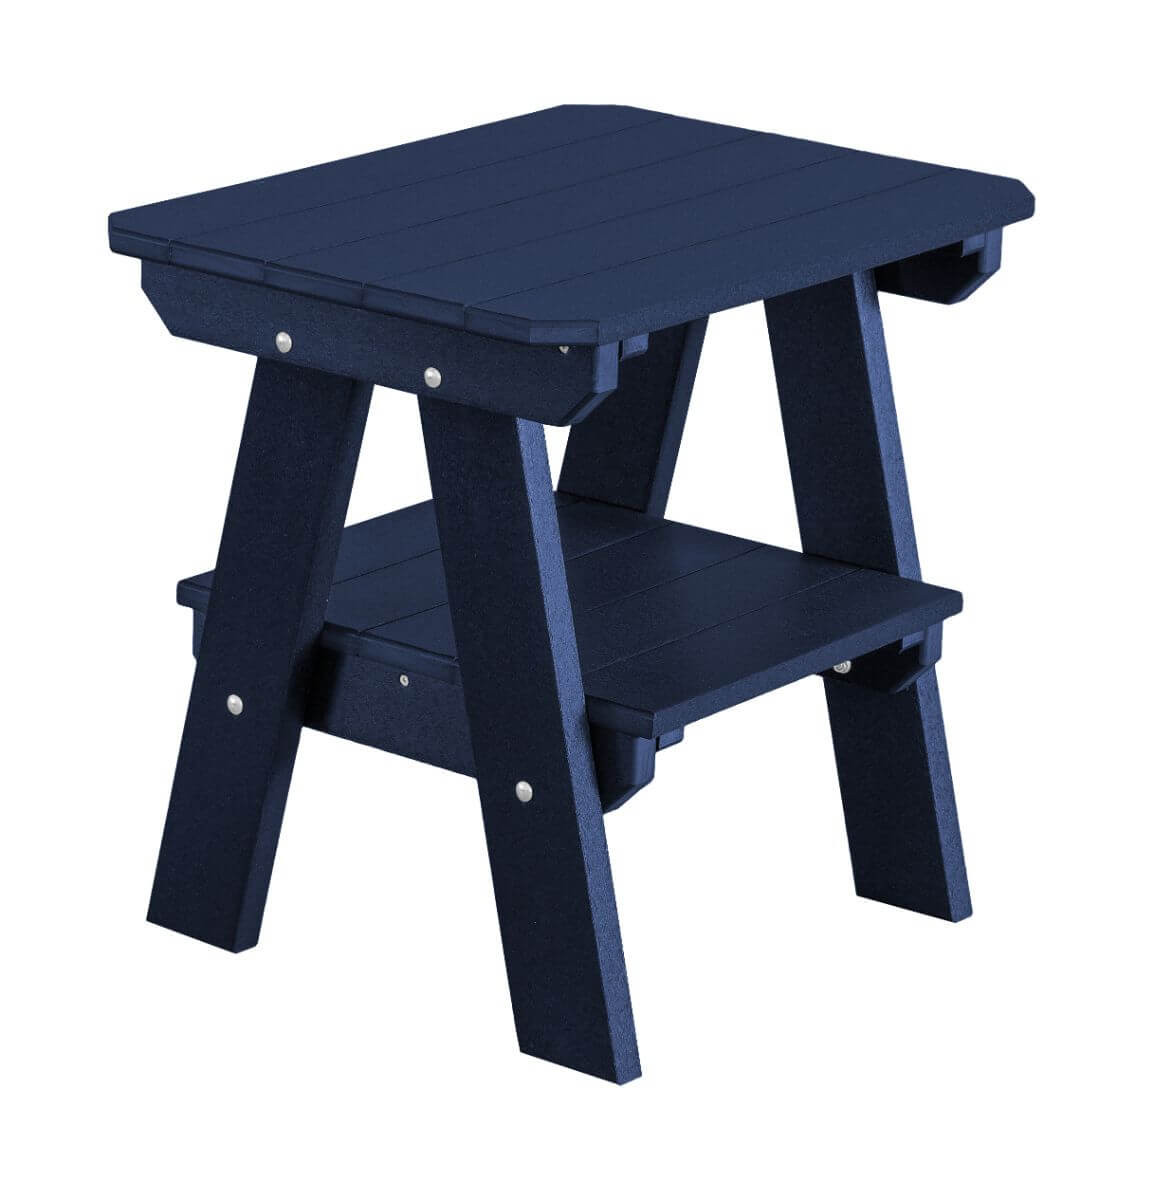 Patriot Blue Sidra Outdoor End Table